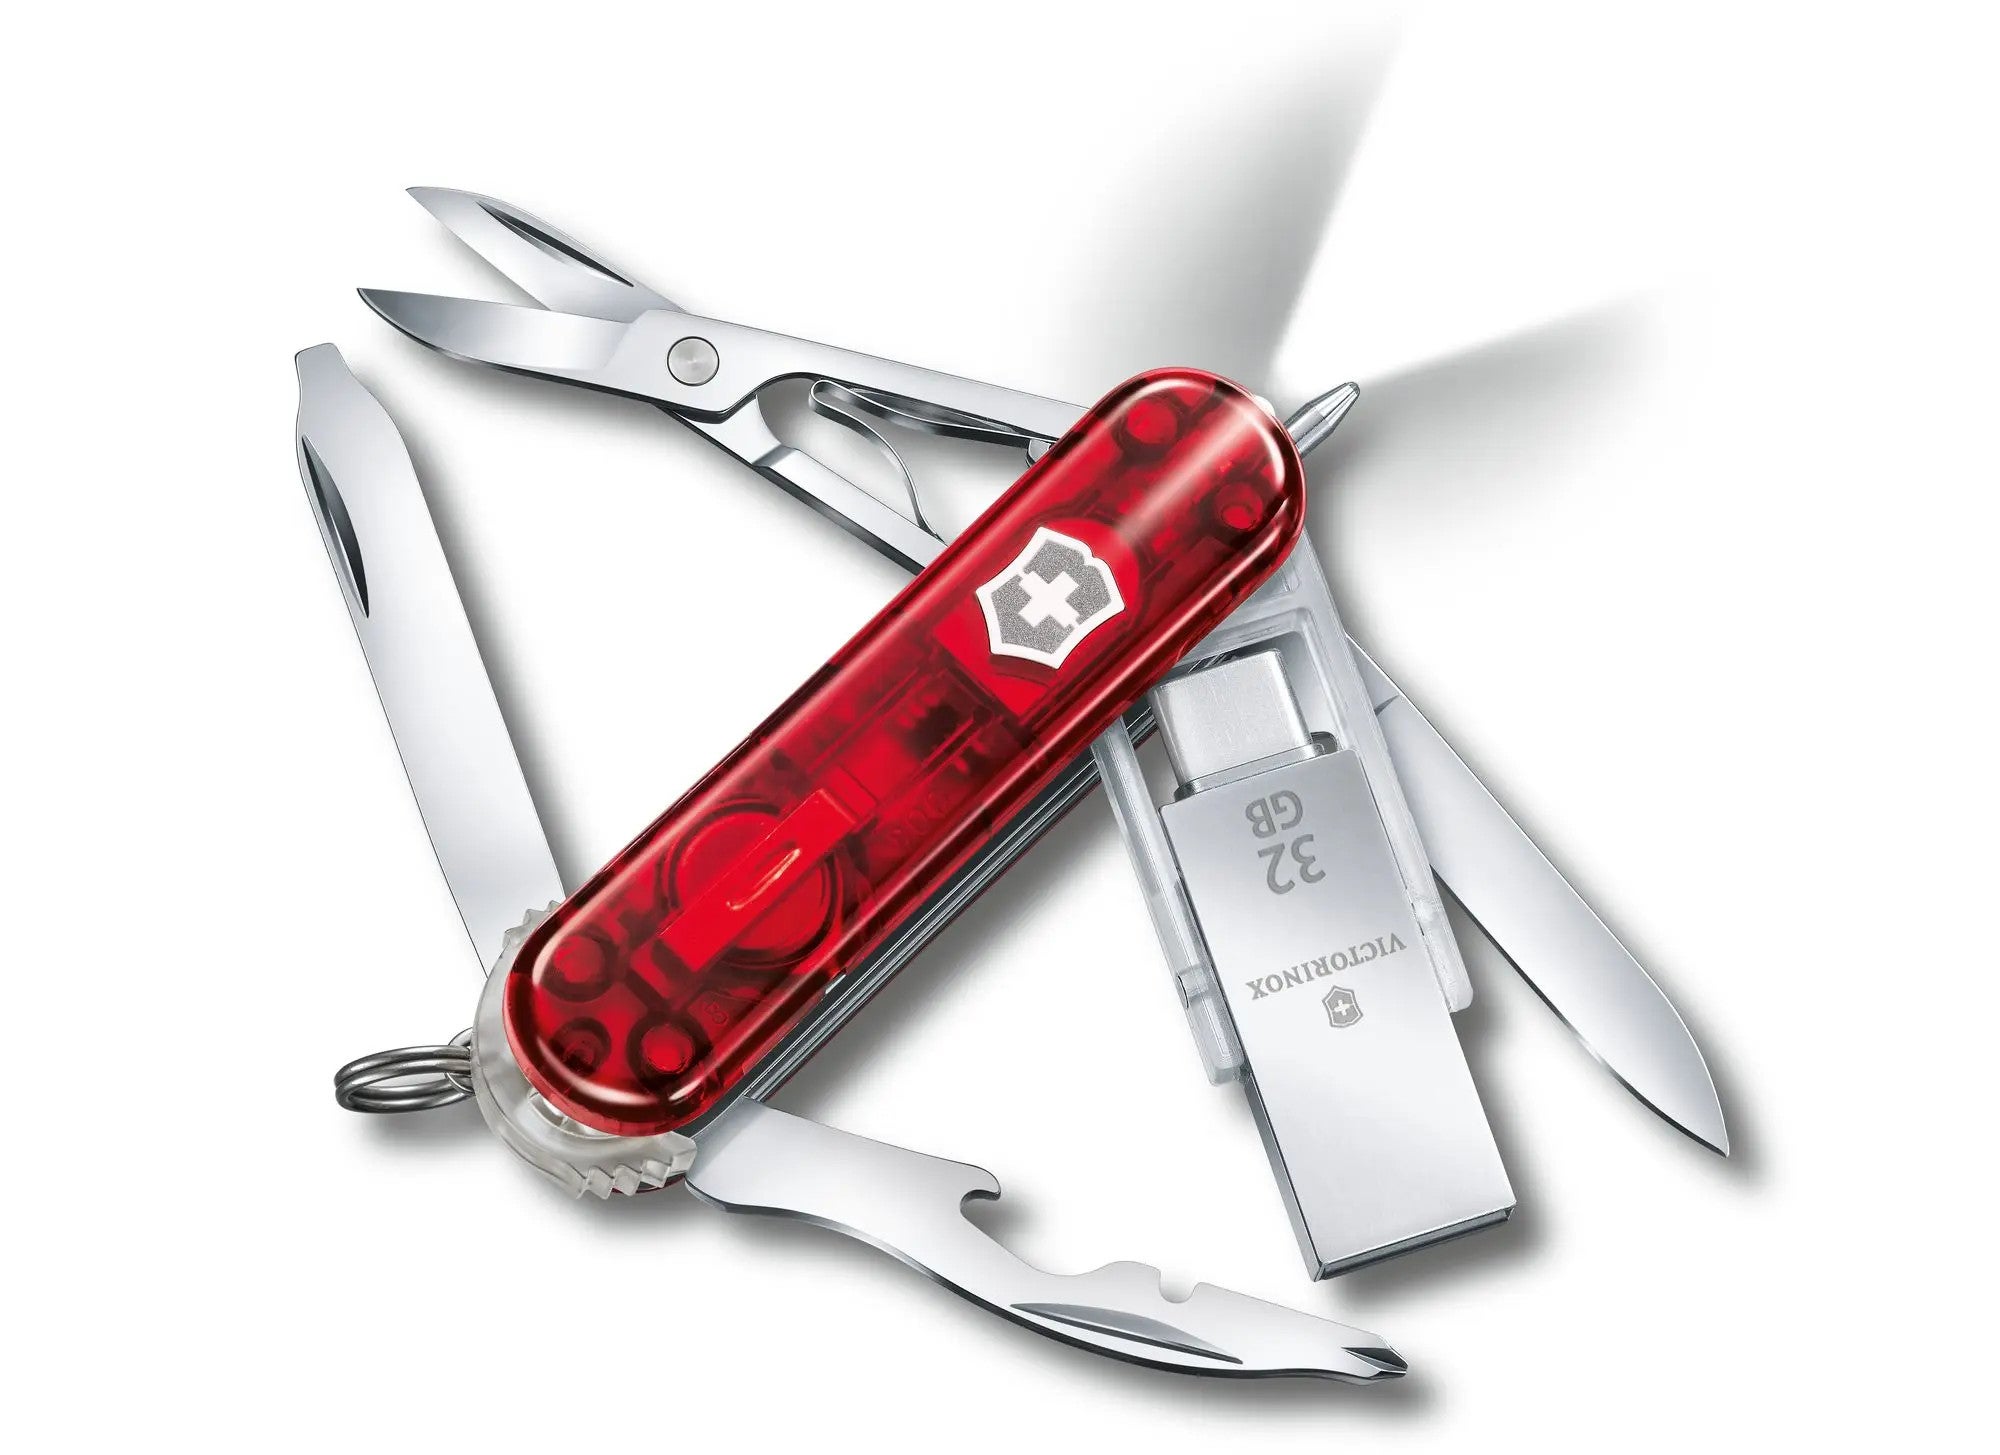 A photo of the Swiss Army Midnite Manager@work knife with tools folded out.